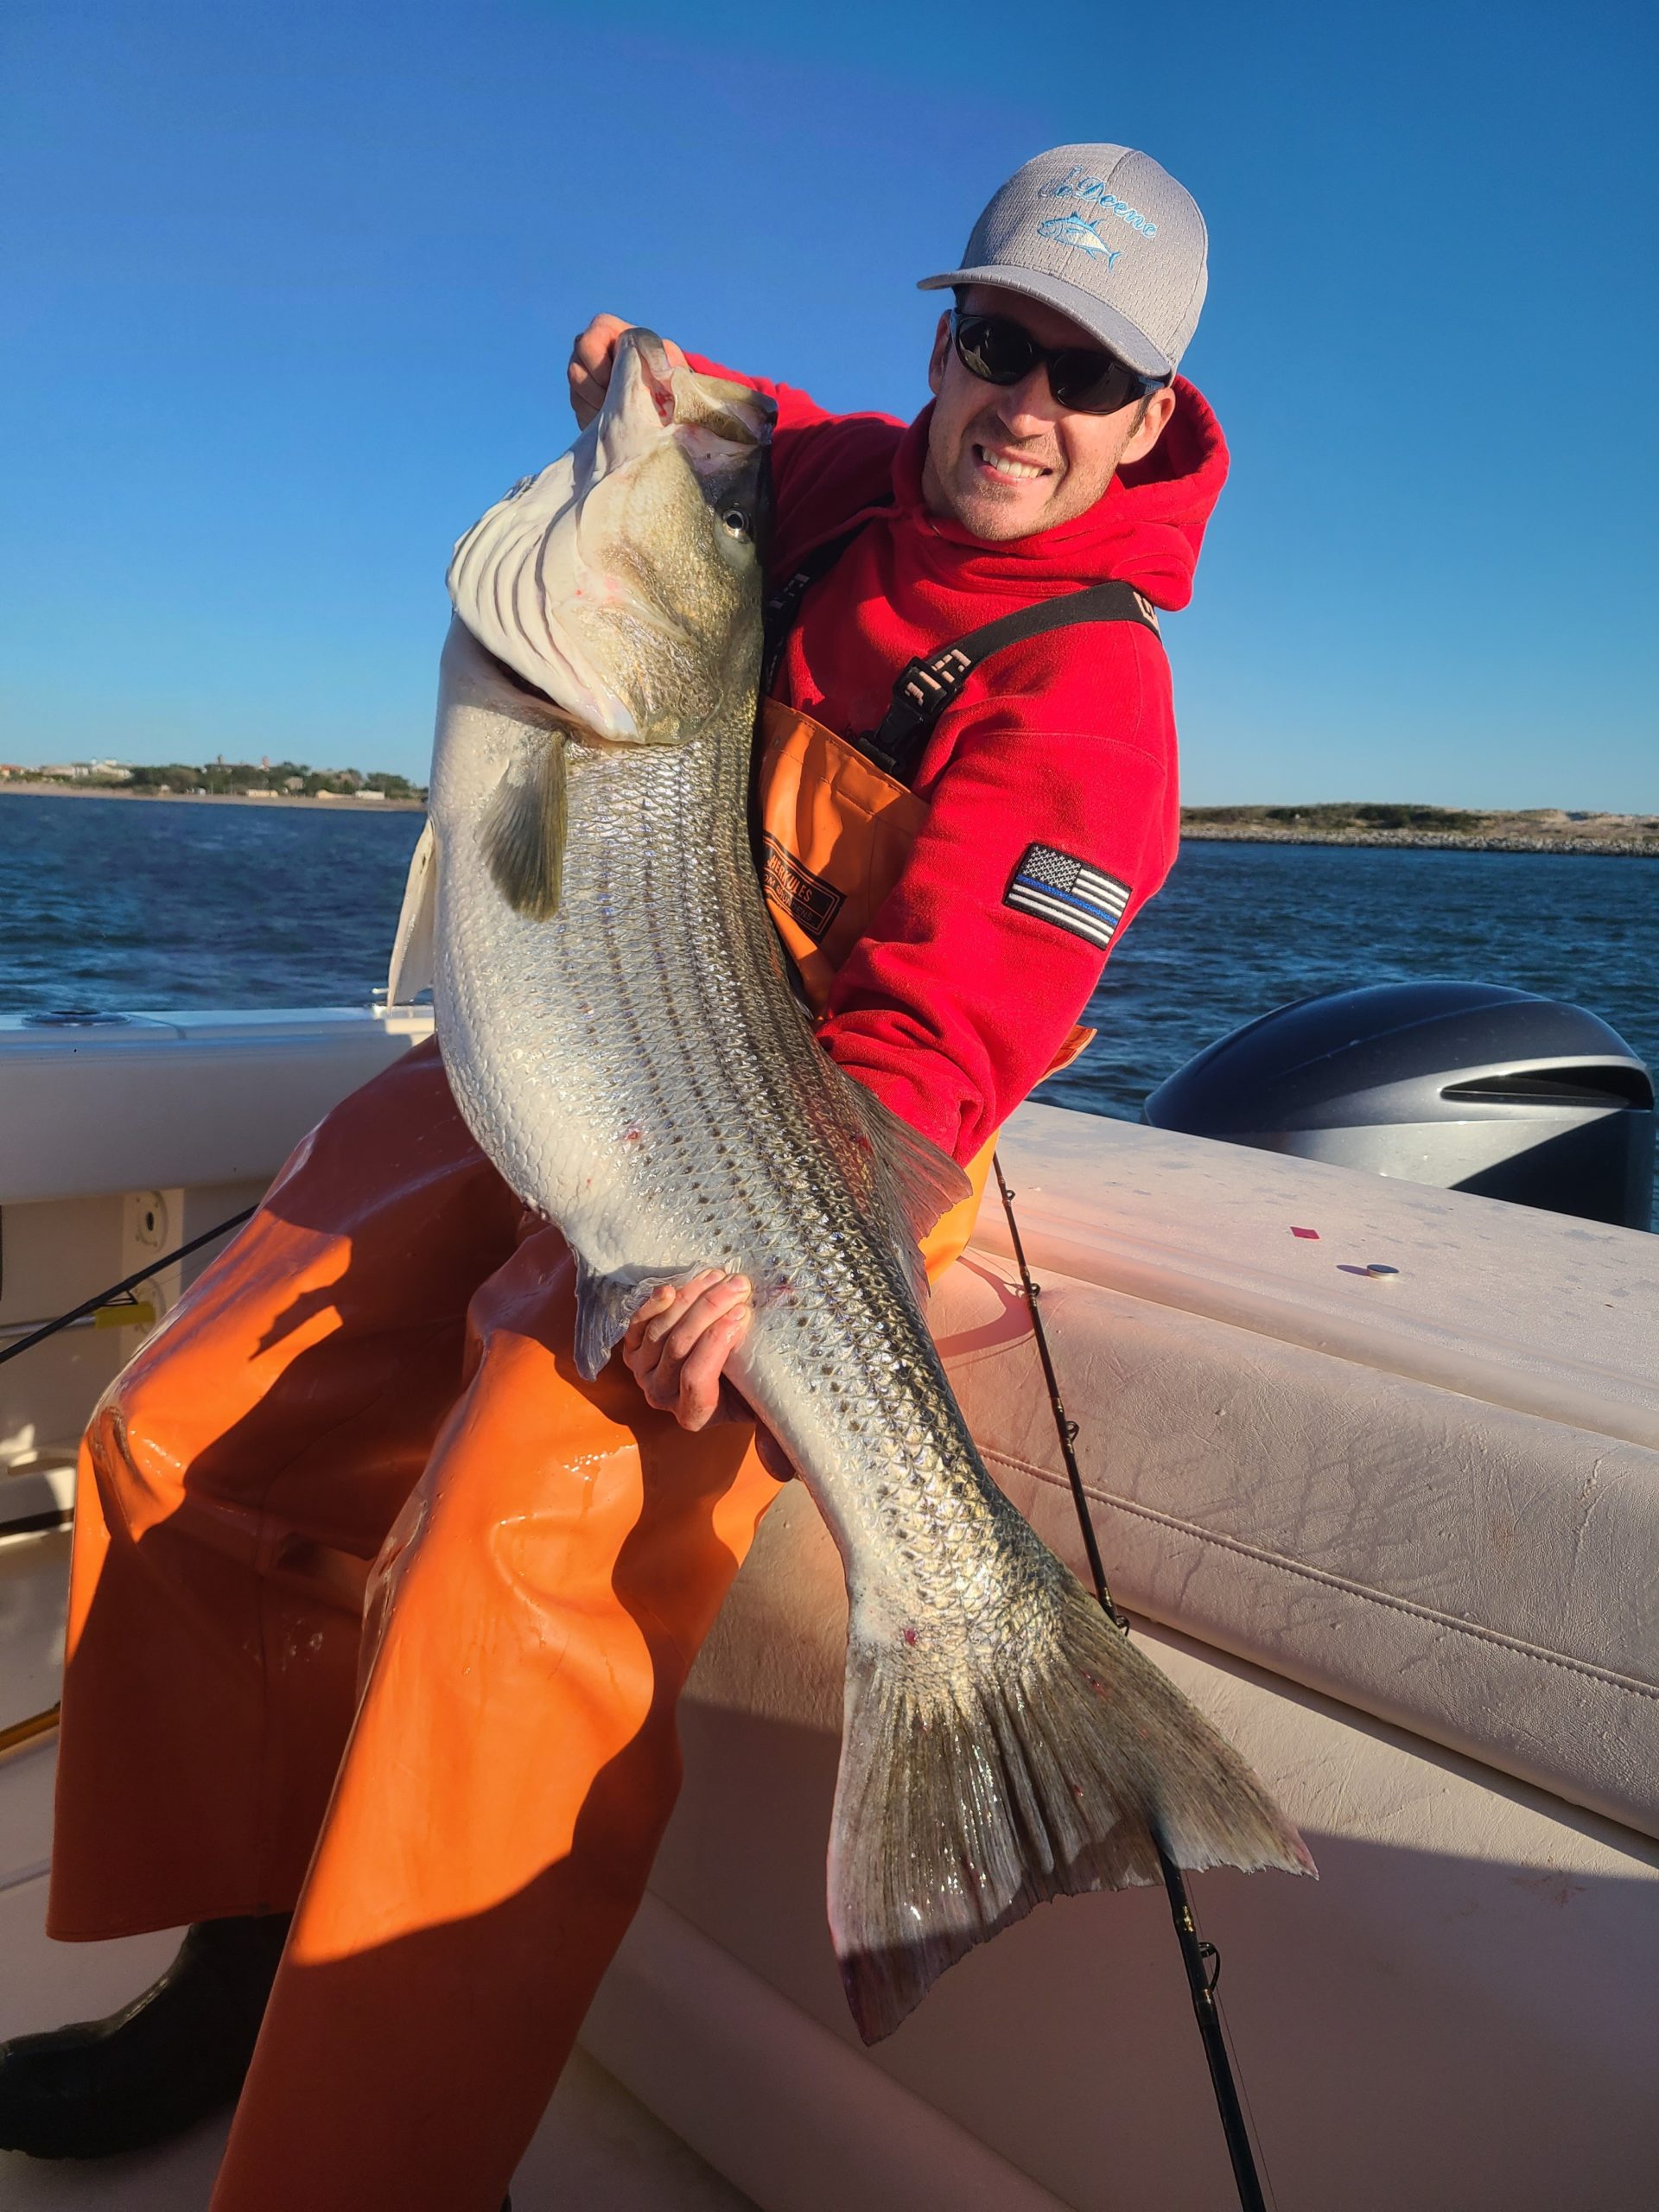 JoJo LaFace caught and released this big striped bass in Shinnecock Inlet last week.